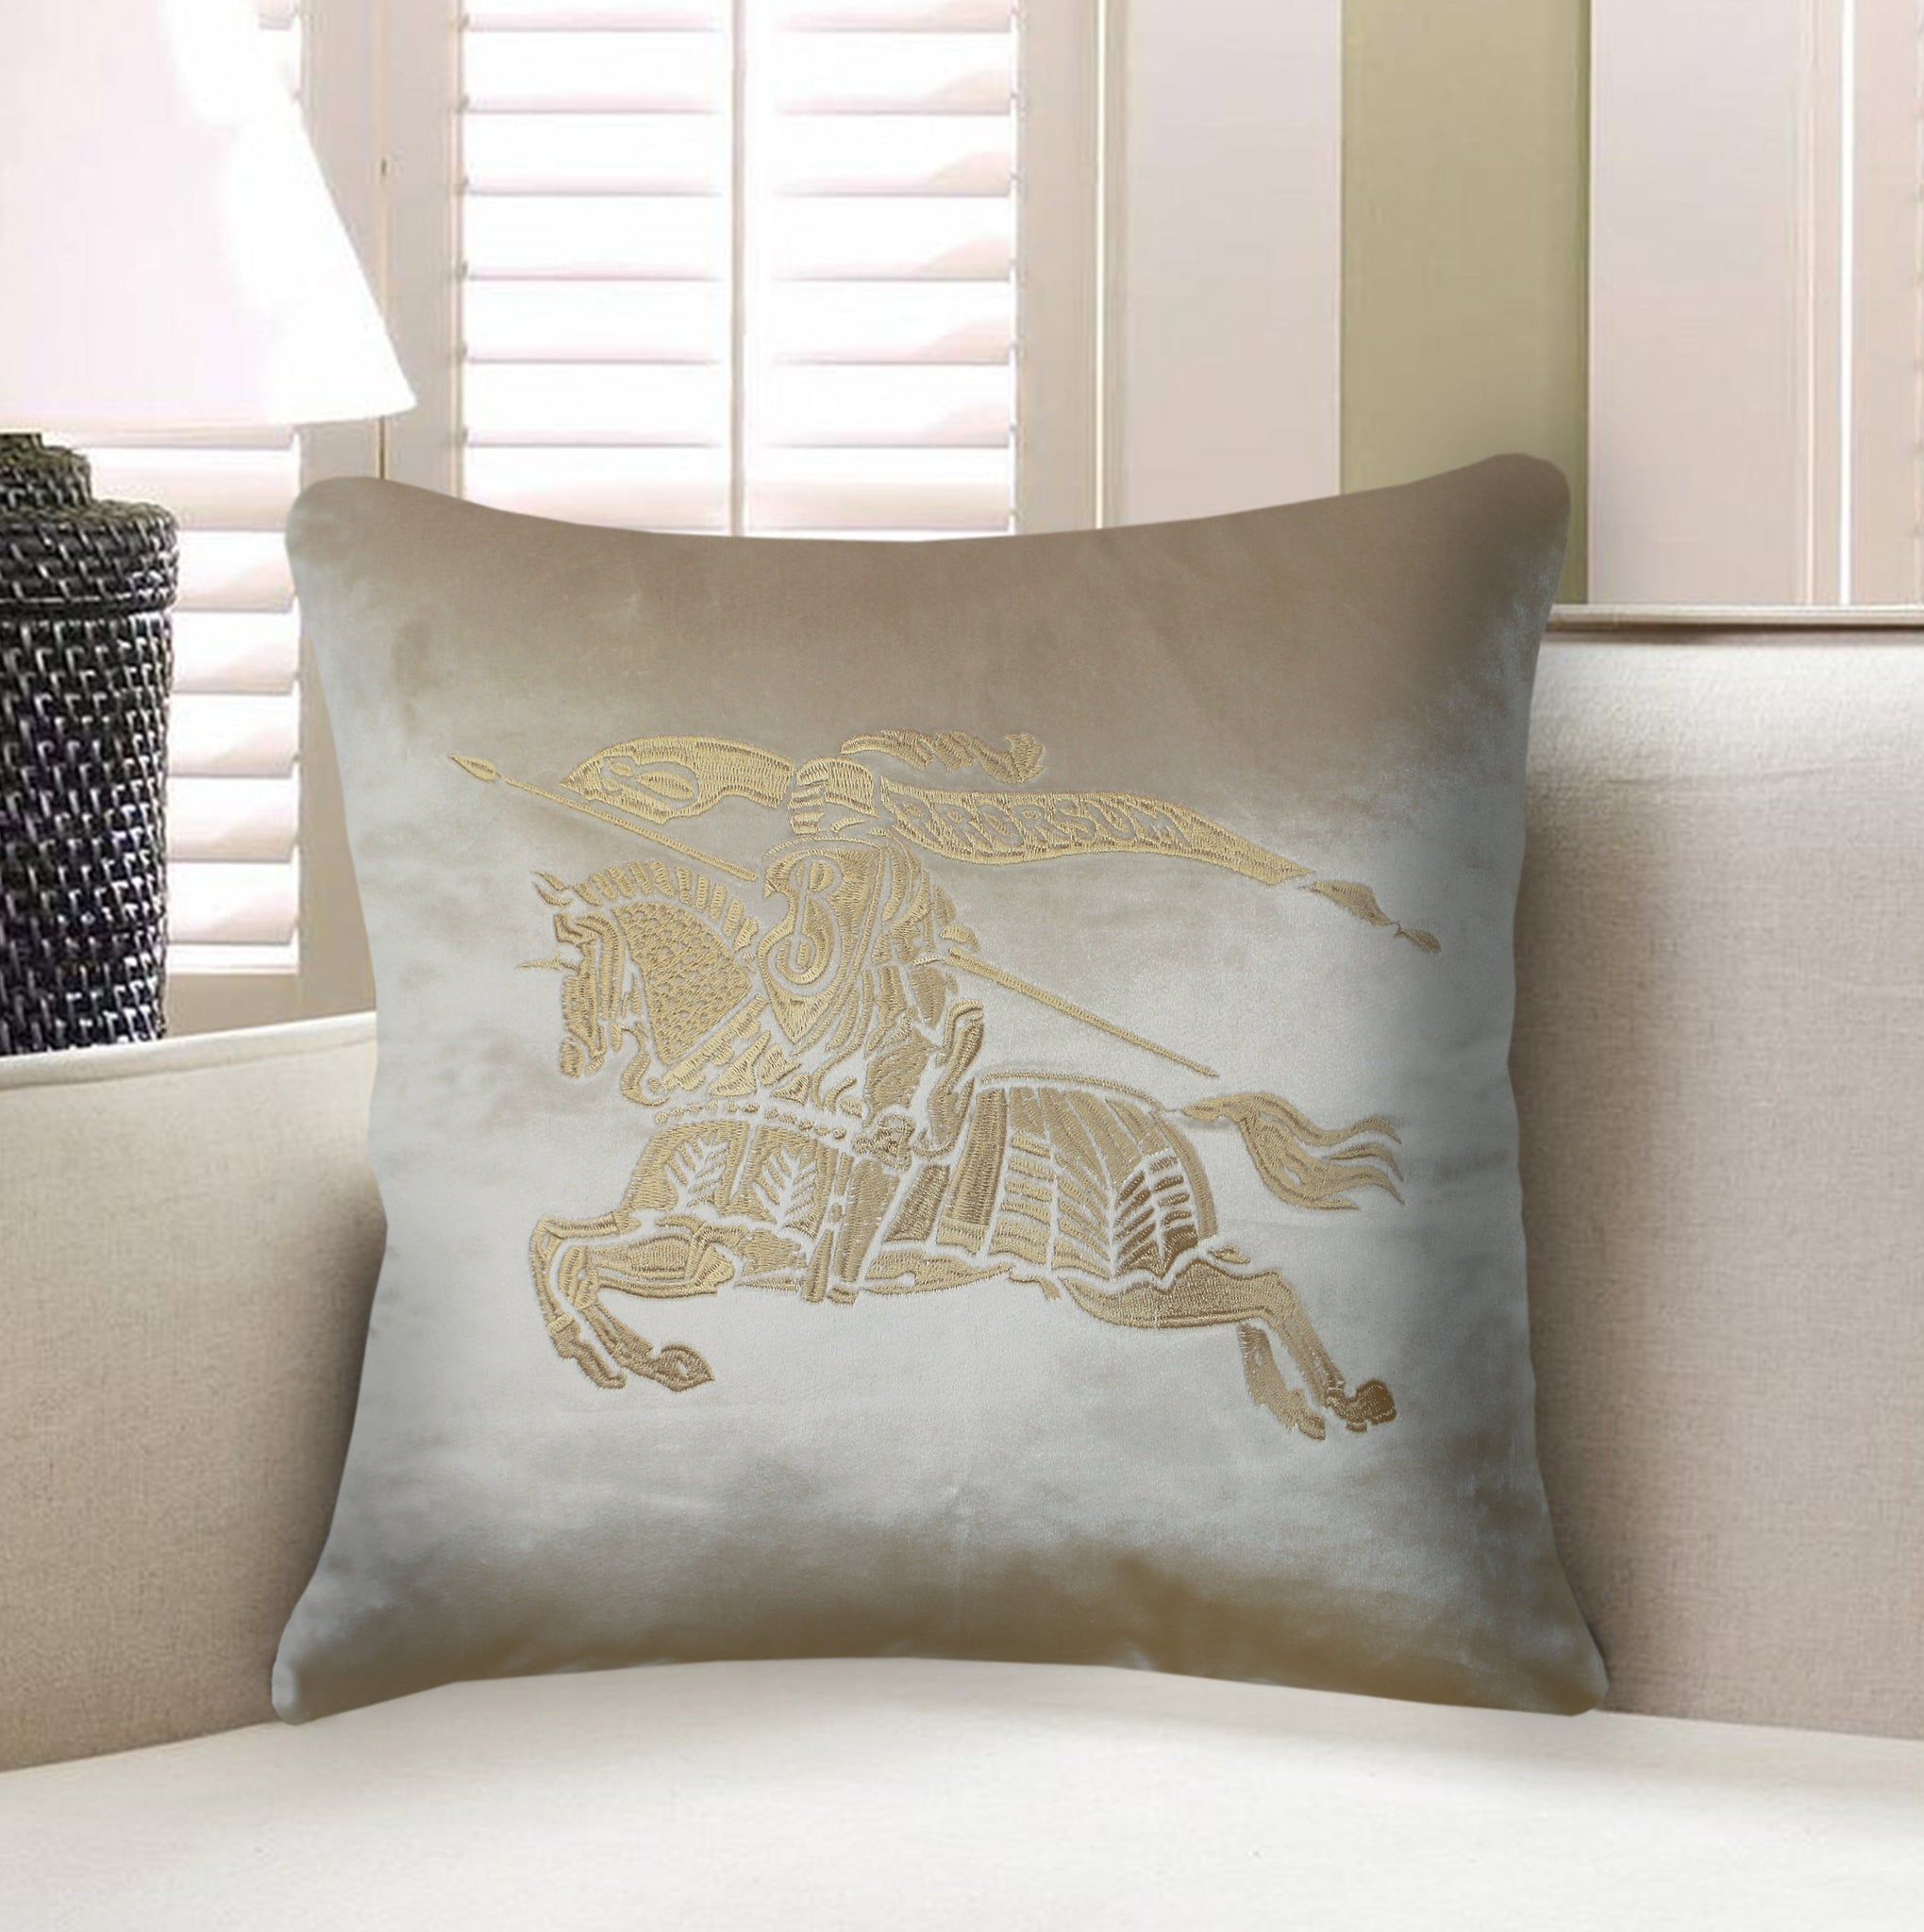 Pillow Cover Velvet Decorative Cushion Cover Embroidery  Iconic Horse Throw Pillow Pillow Case for Sofa Chair Bedroom Living Room 45x45 cm 18x18 Inches